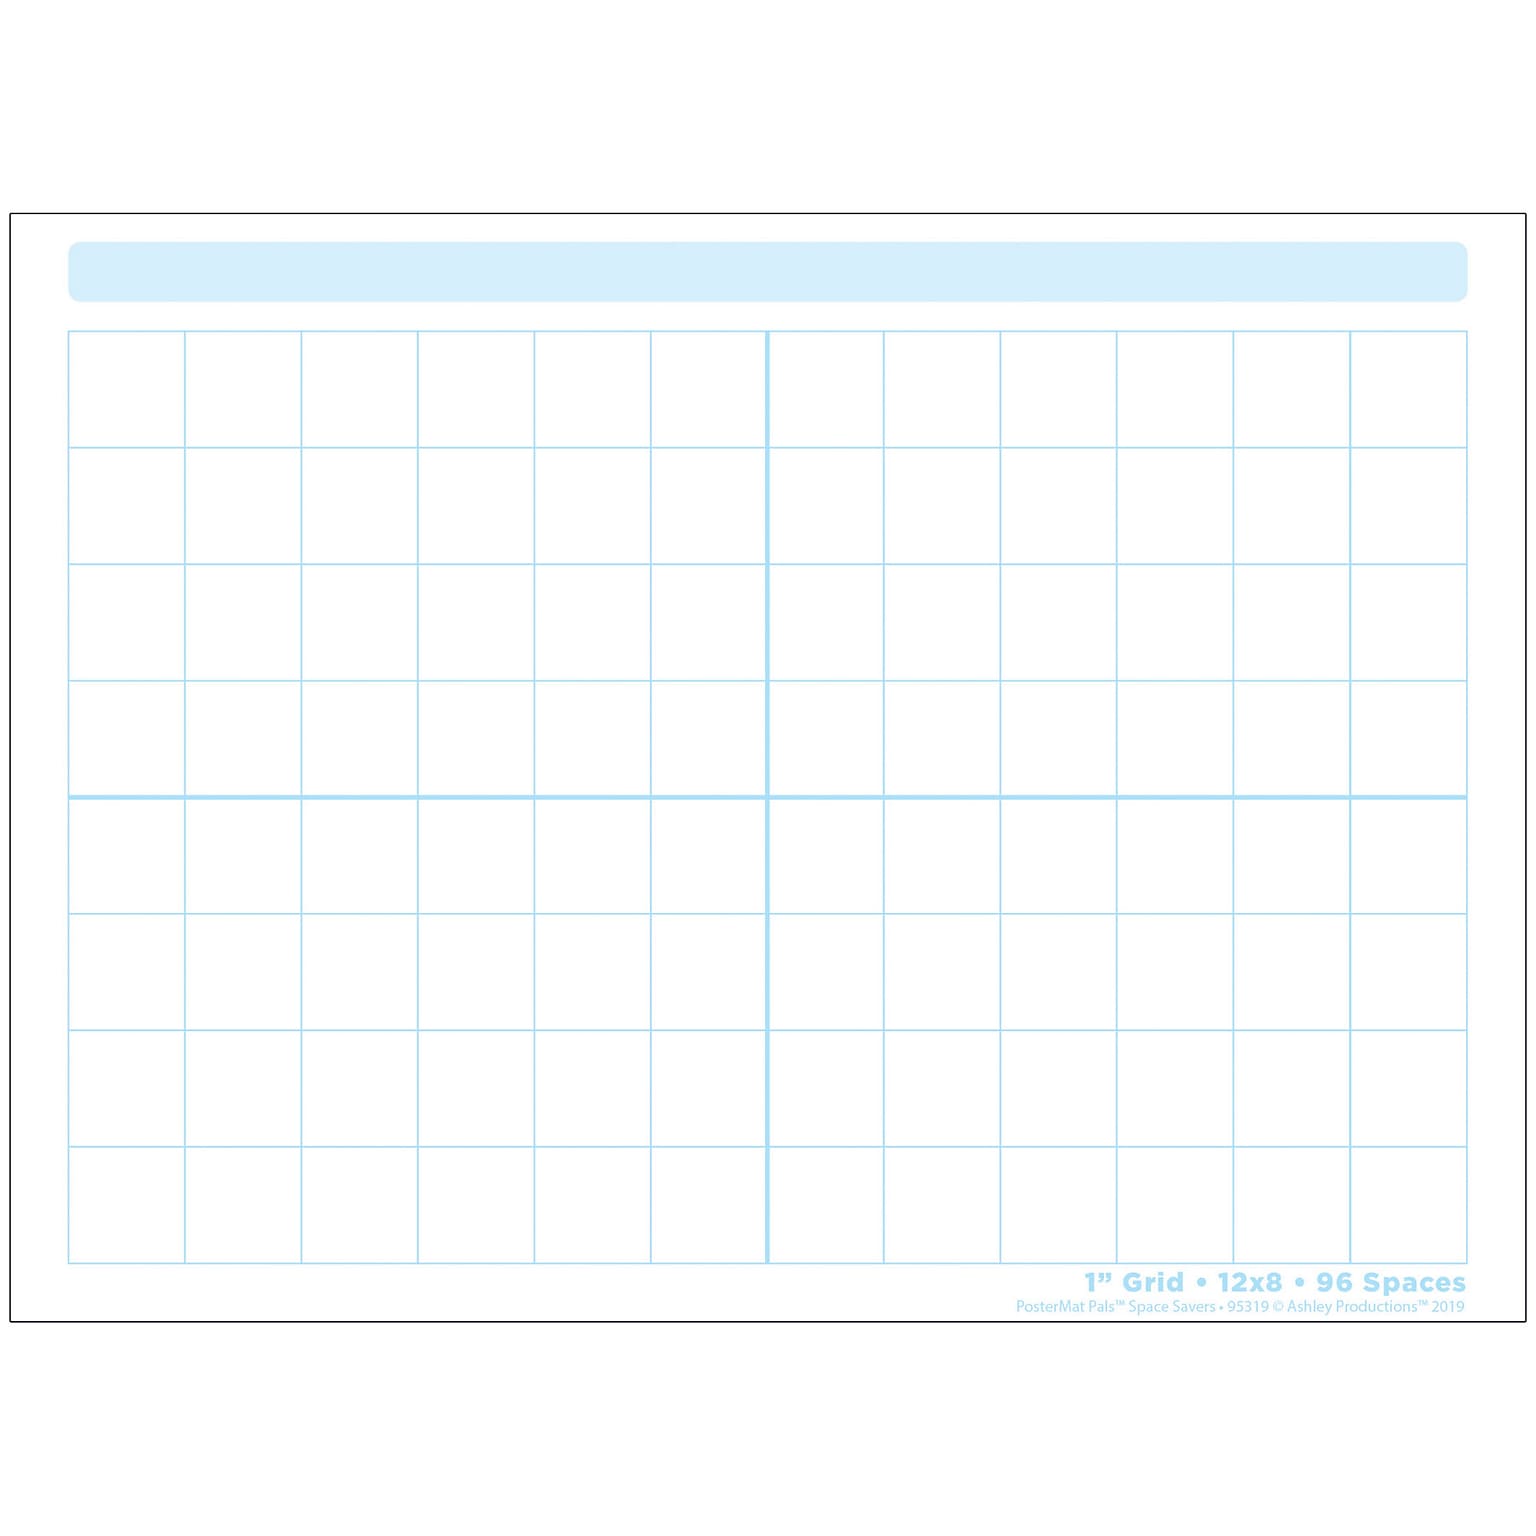 Ashley Productions Smart Poly Space Savers 13 x 9.5 Grid Blocks 1 PosterMat Pals, Single Sided (ASH95319)